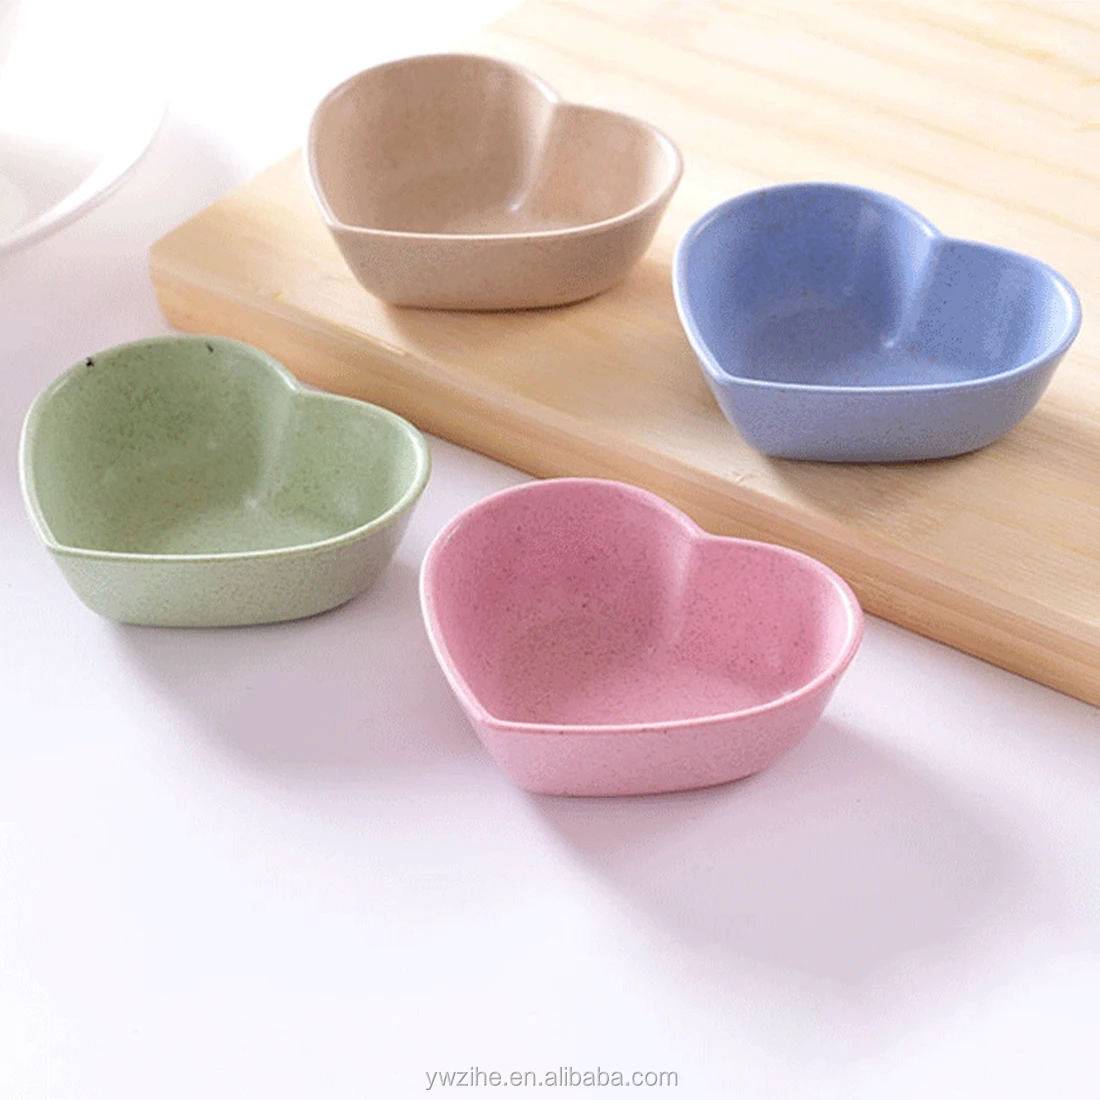 Wheat Straw Love Heart Shape Small Plates Snack Dish Sauce Plate 4 Colors&Shape 